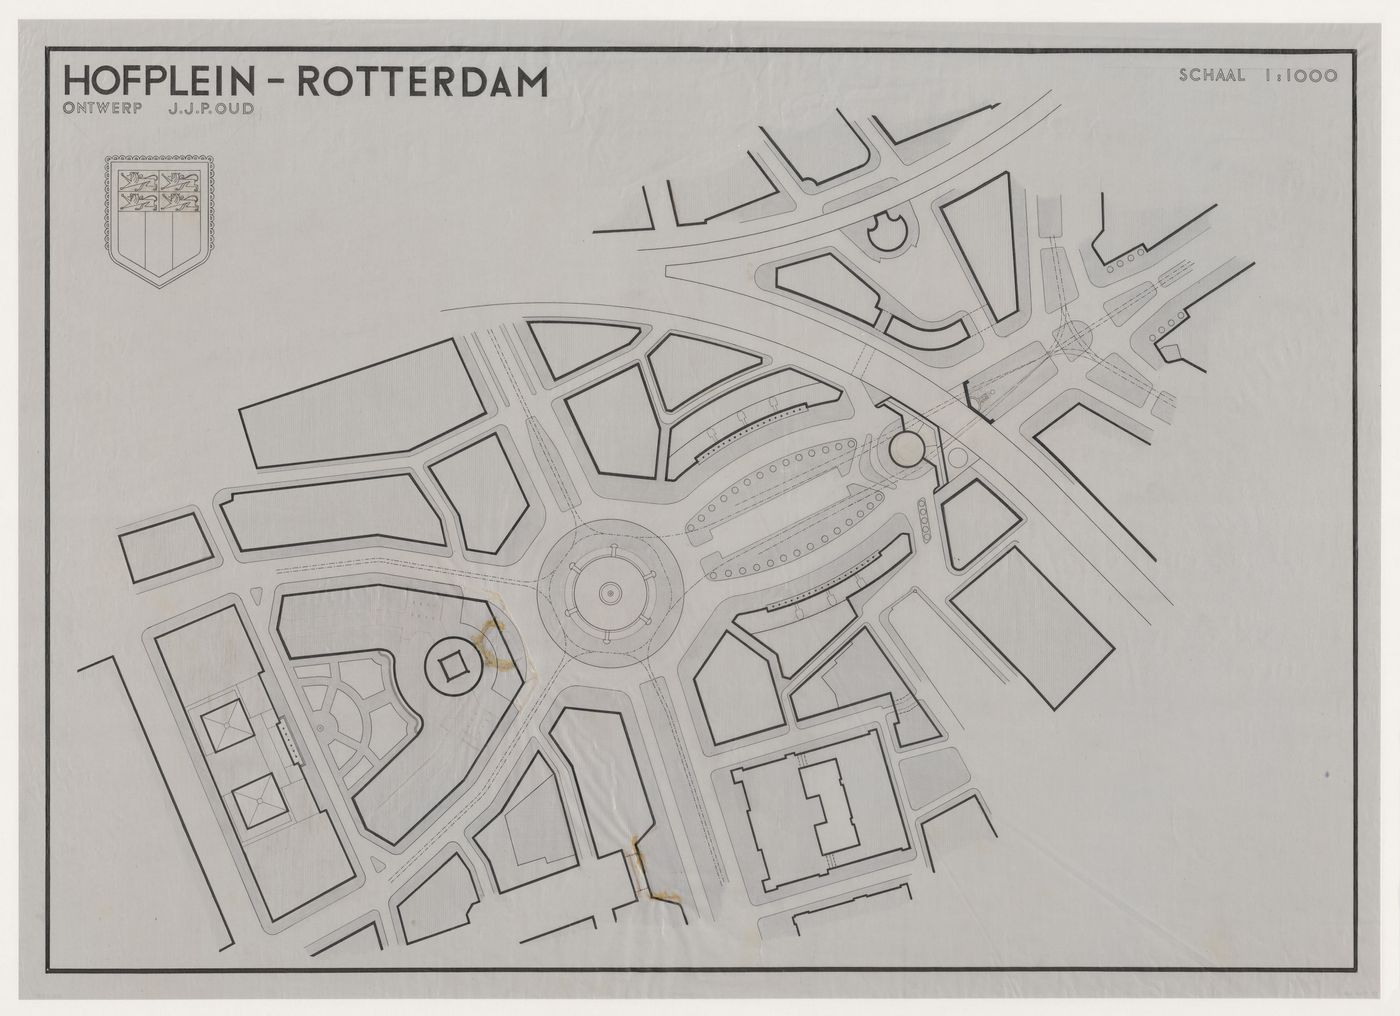 Site plan for a model for a city hall, monument plaza, mixed-use developments and Café Viaduct for the reconstruction of the Hofplein (city centre), Rotterdam, Netherlands